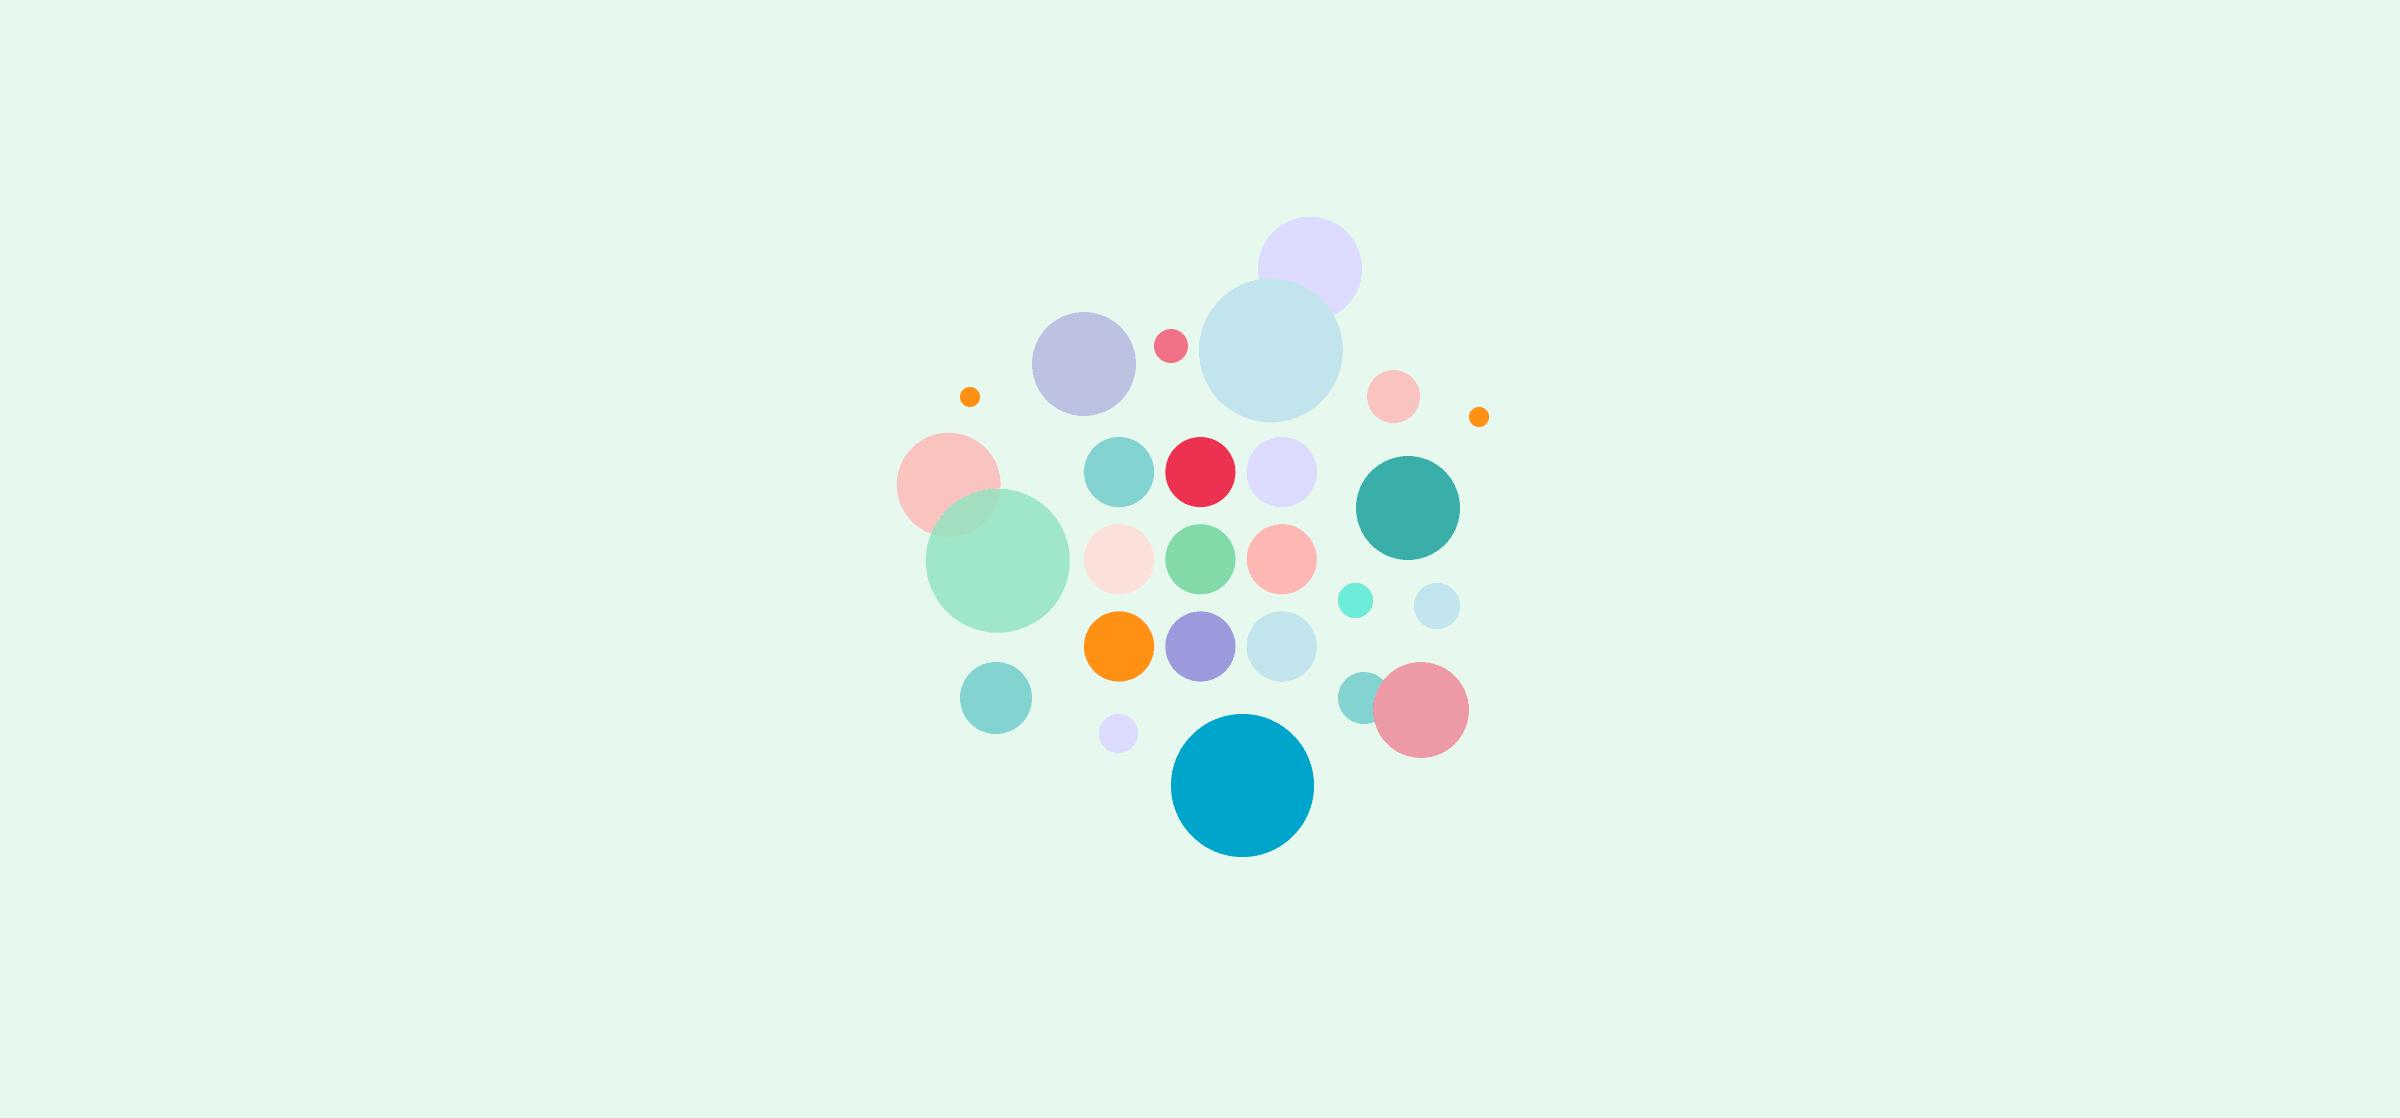 Scattered dots in multiple colors, representing Unito's workflow designer